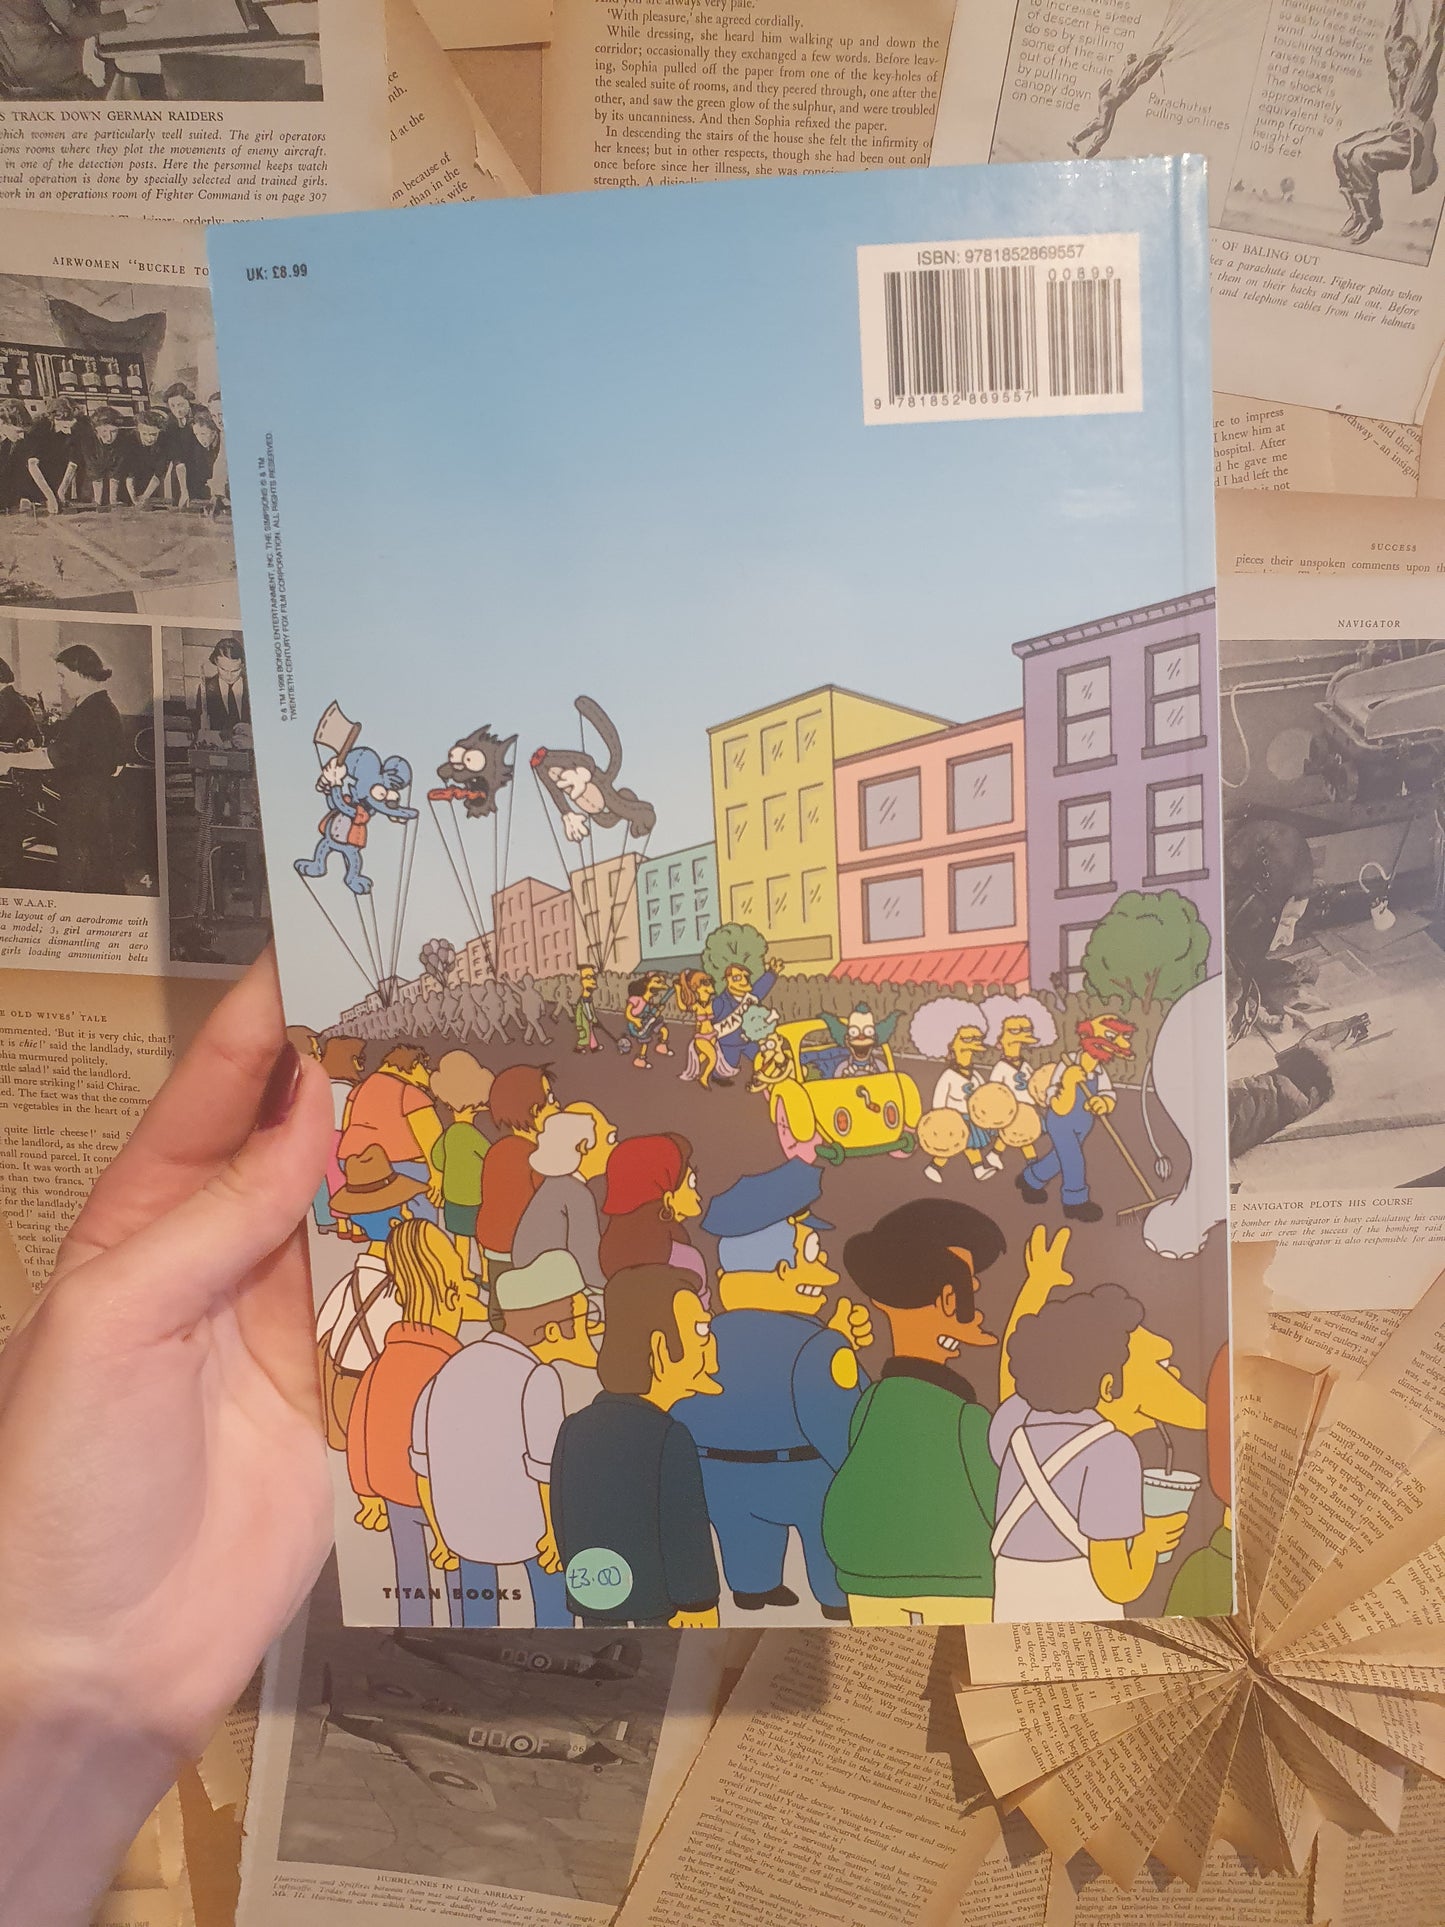 Simpsons Comics On Parade by Groening (1998)